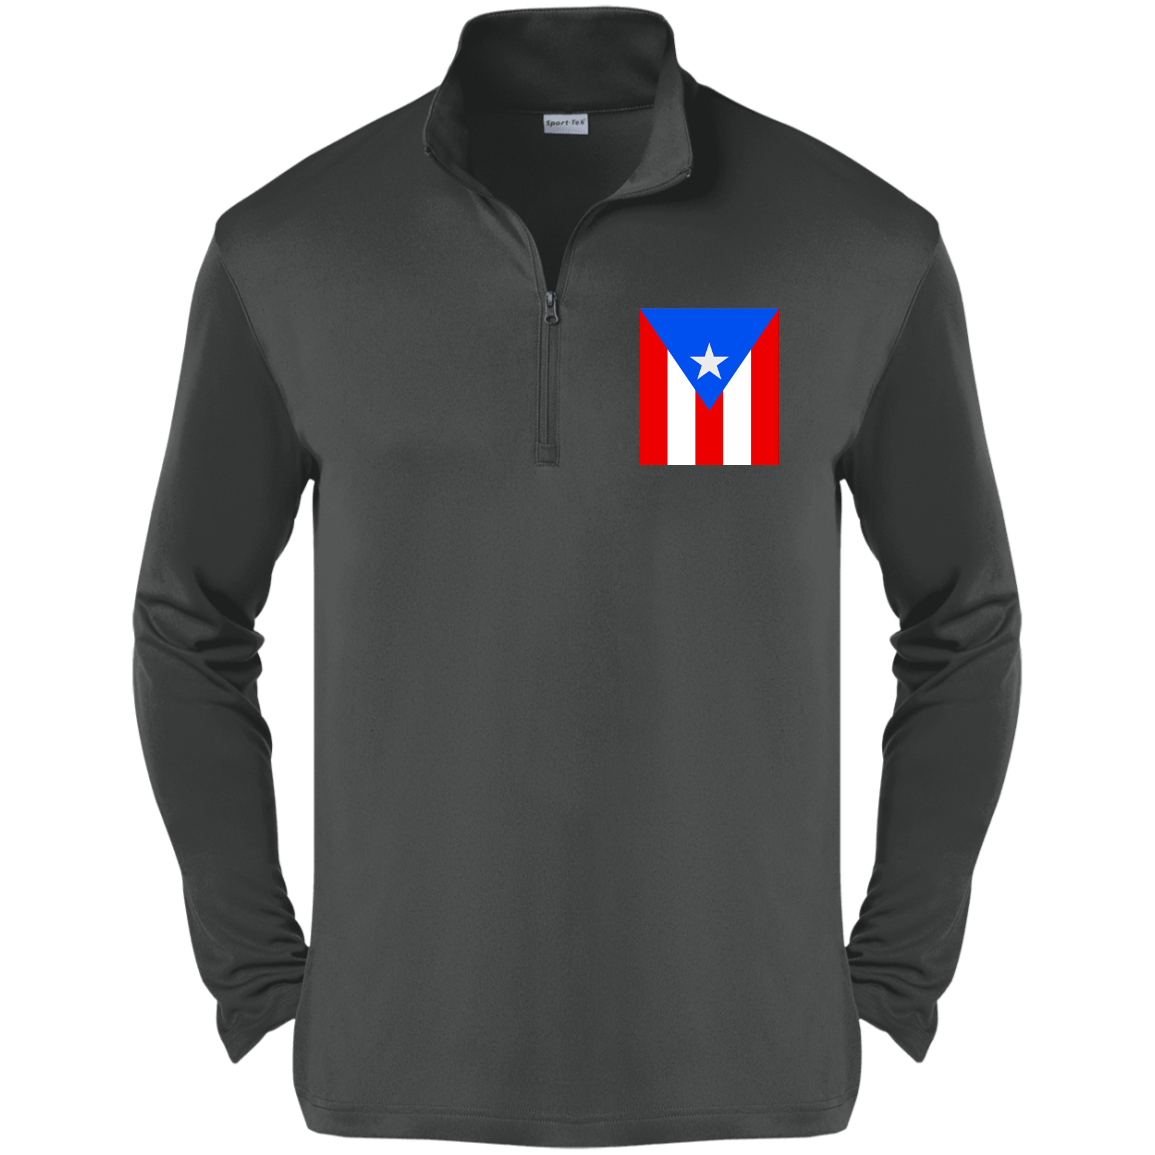 Puerto Rico Flag Competitor Embroidered 1/4-Zip Pullover (Small-4XL)